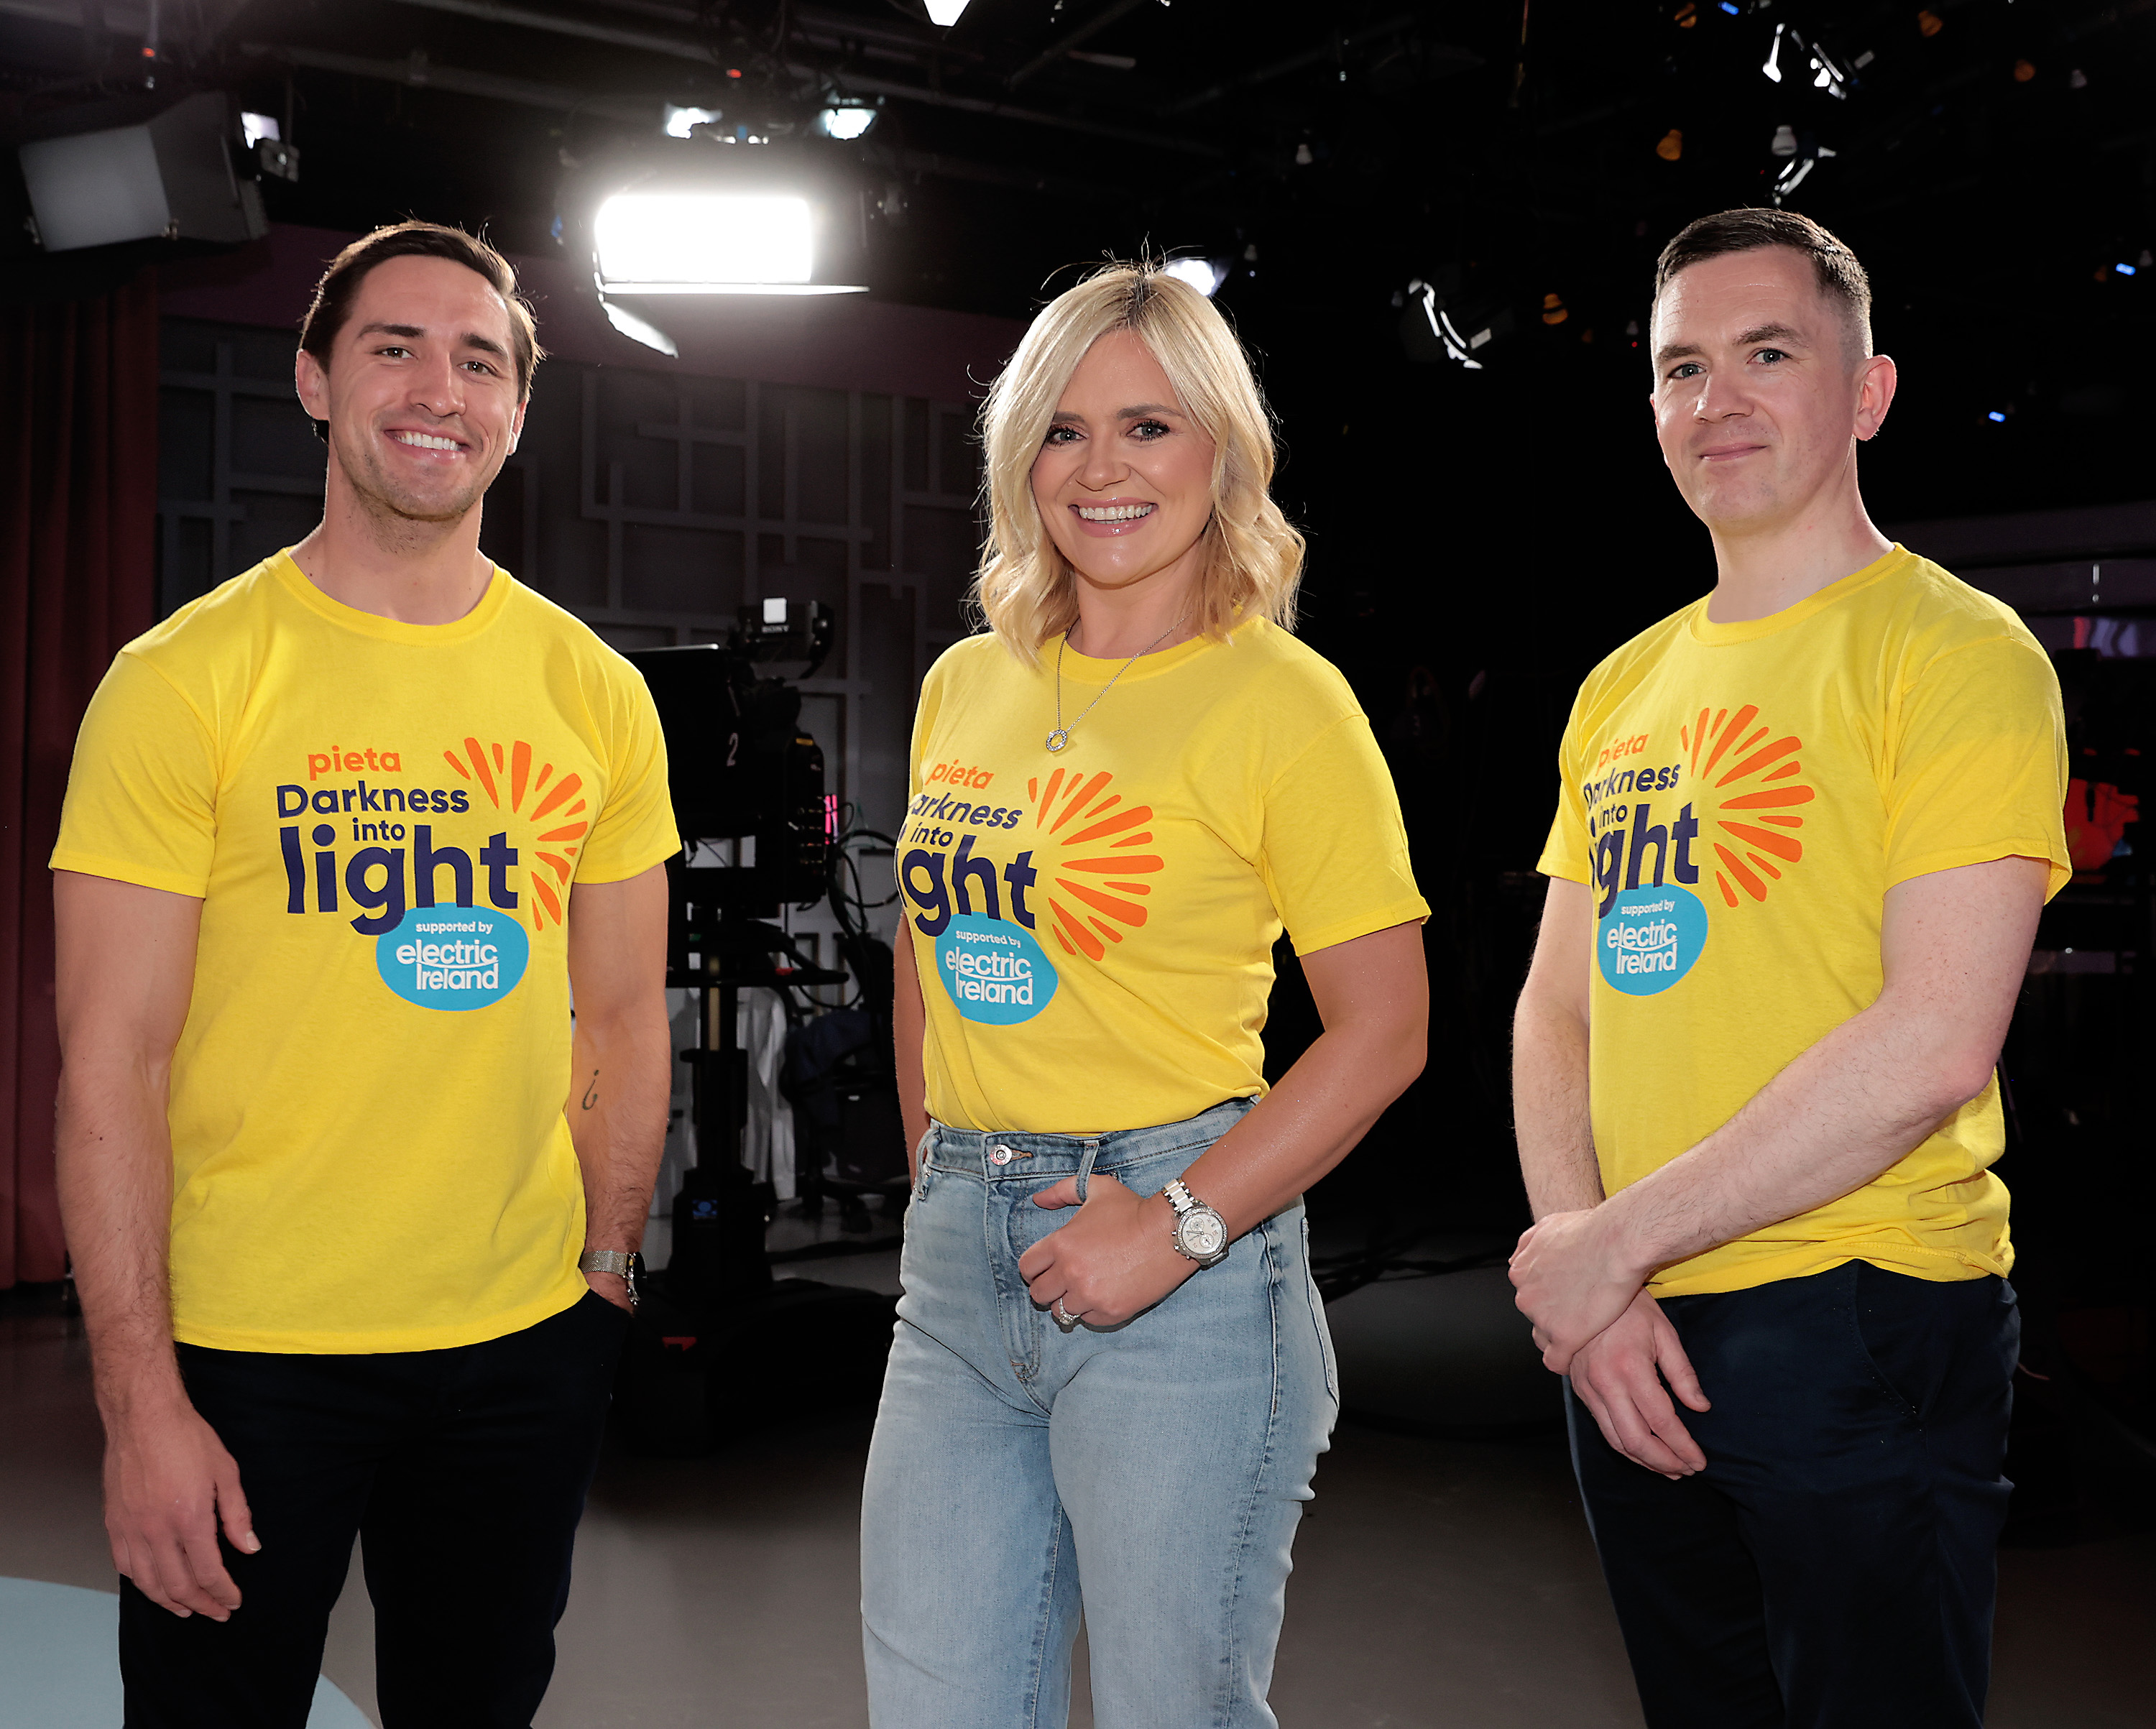 Virgin Media Television partners with Electric Ireland and Pieta House for the 2023 Darkness into Light event this May 